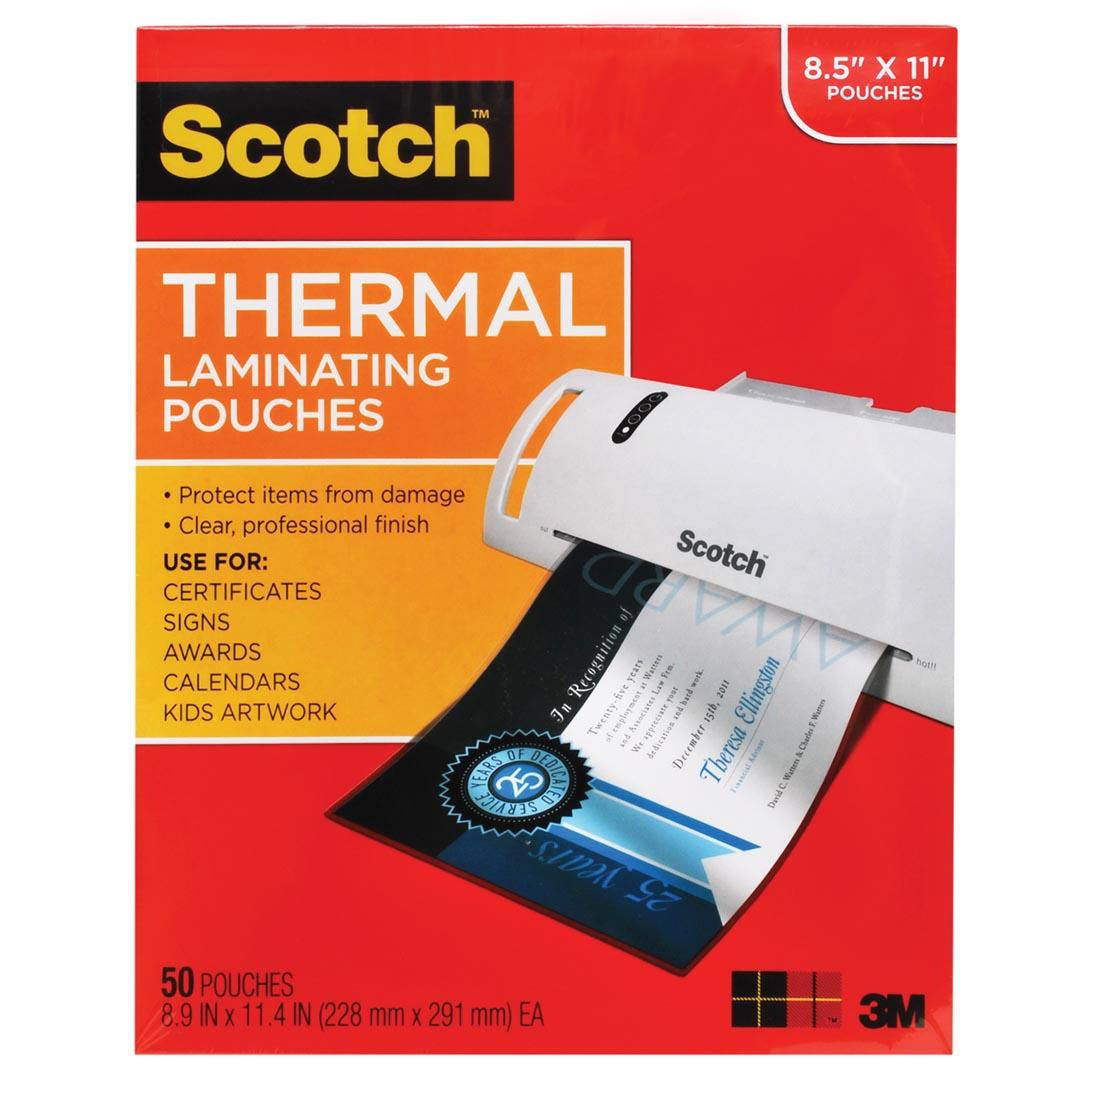 Scotch Thermal Laminating Pouches, Full-Sheets, 50-Count Package